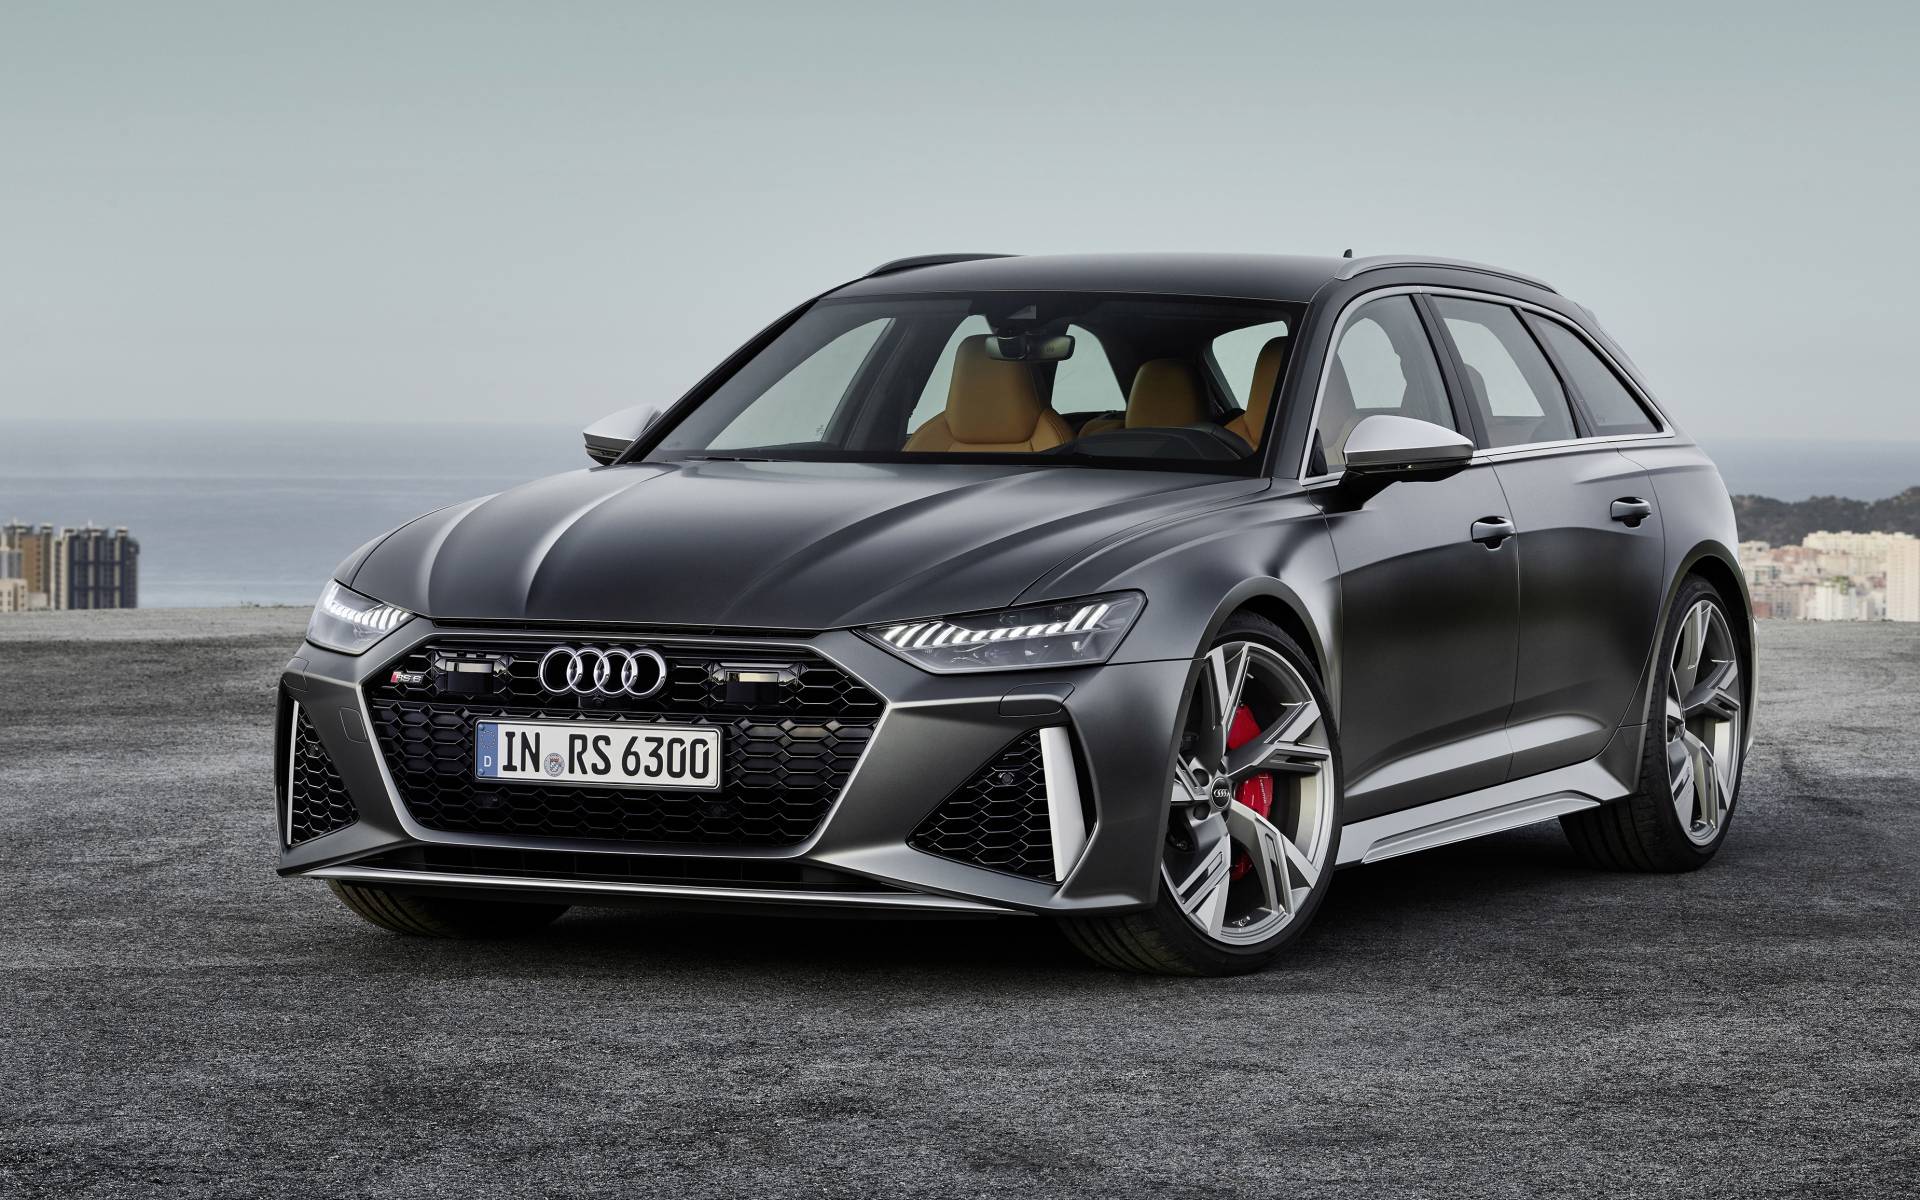 2020 Audi A6 - News, reviews, picture galleries and videos - The Car Guide